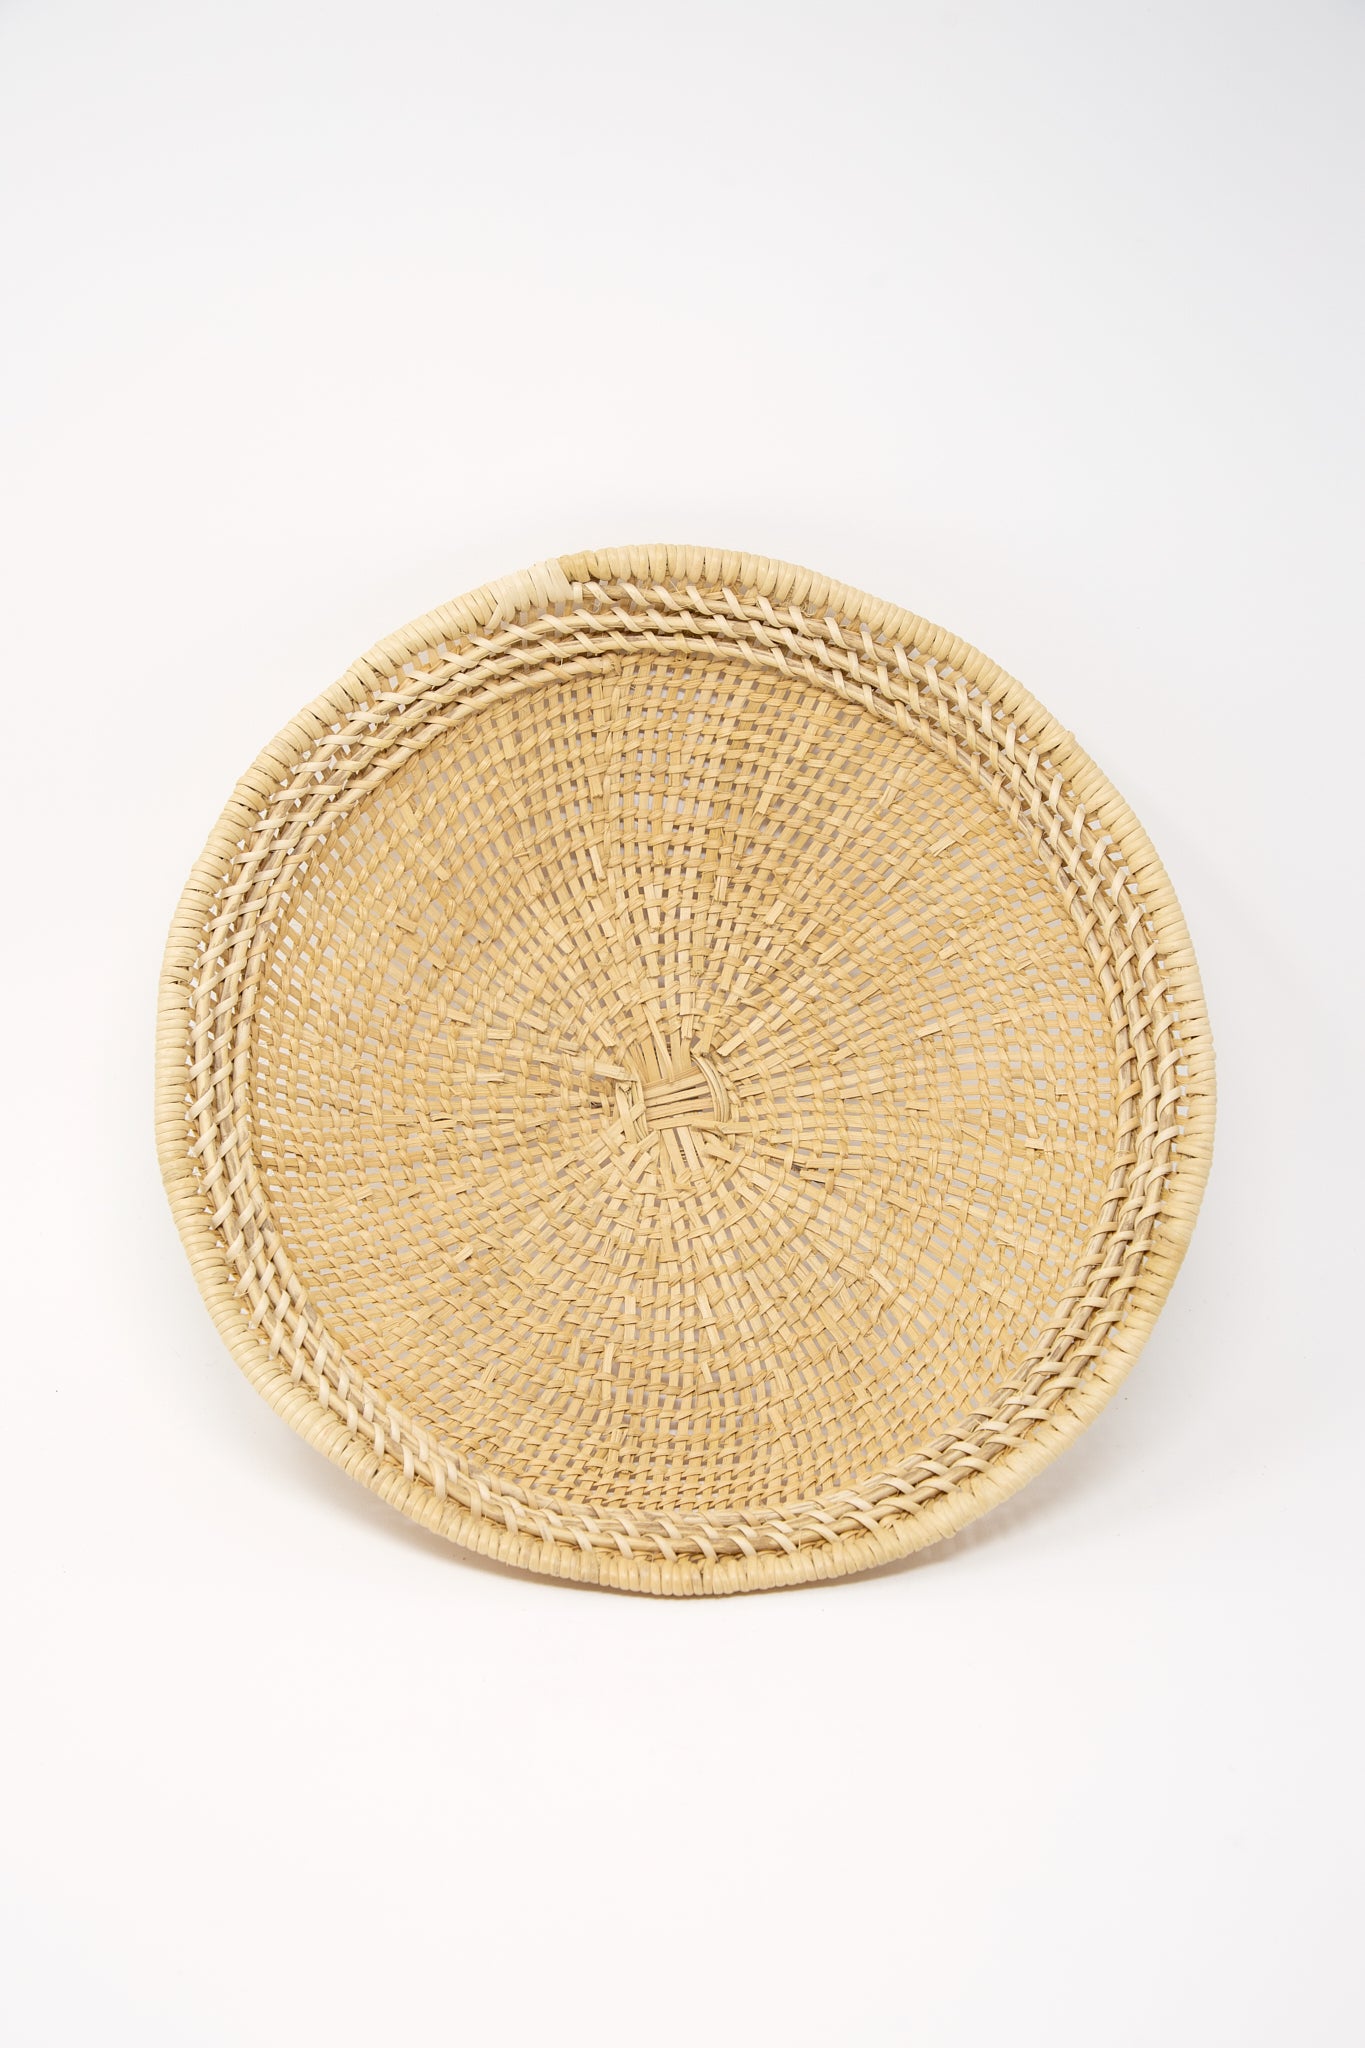 A Small Avia Pova Basket, handcrafted by an artisan, on a white background, produced by Plaza Bolivar.